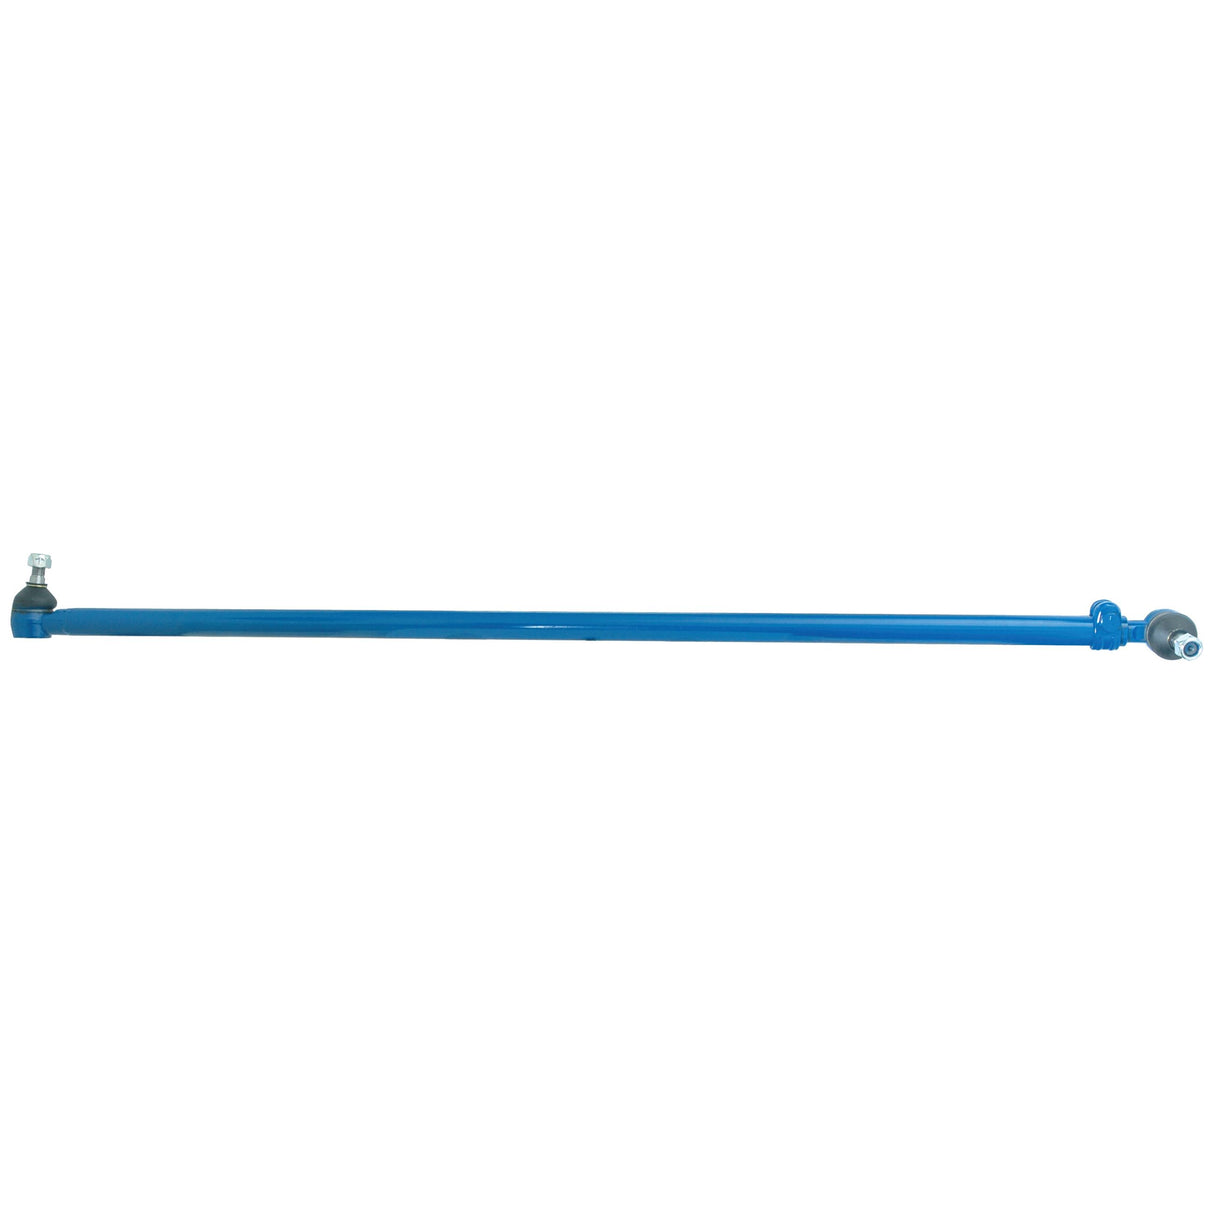 Track Rod/Drag Link Assembly, Length: 1235mm
 - S.65042 - Farming Parts